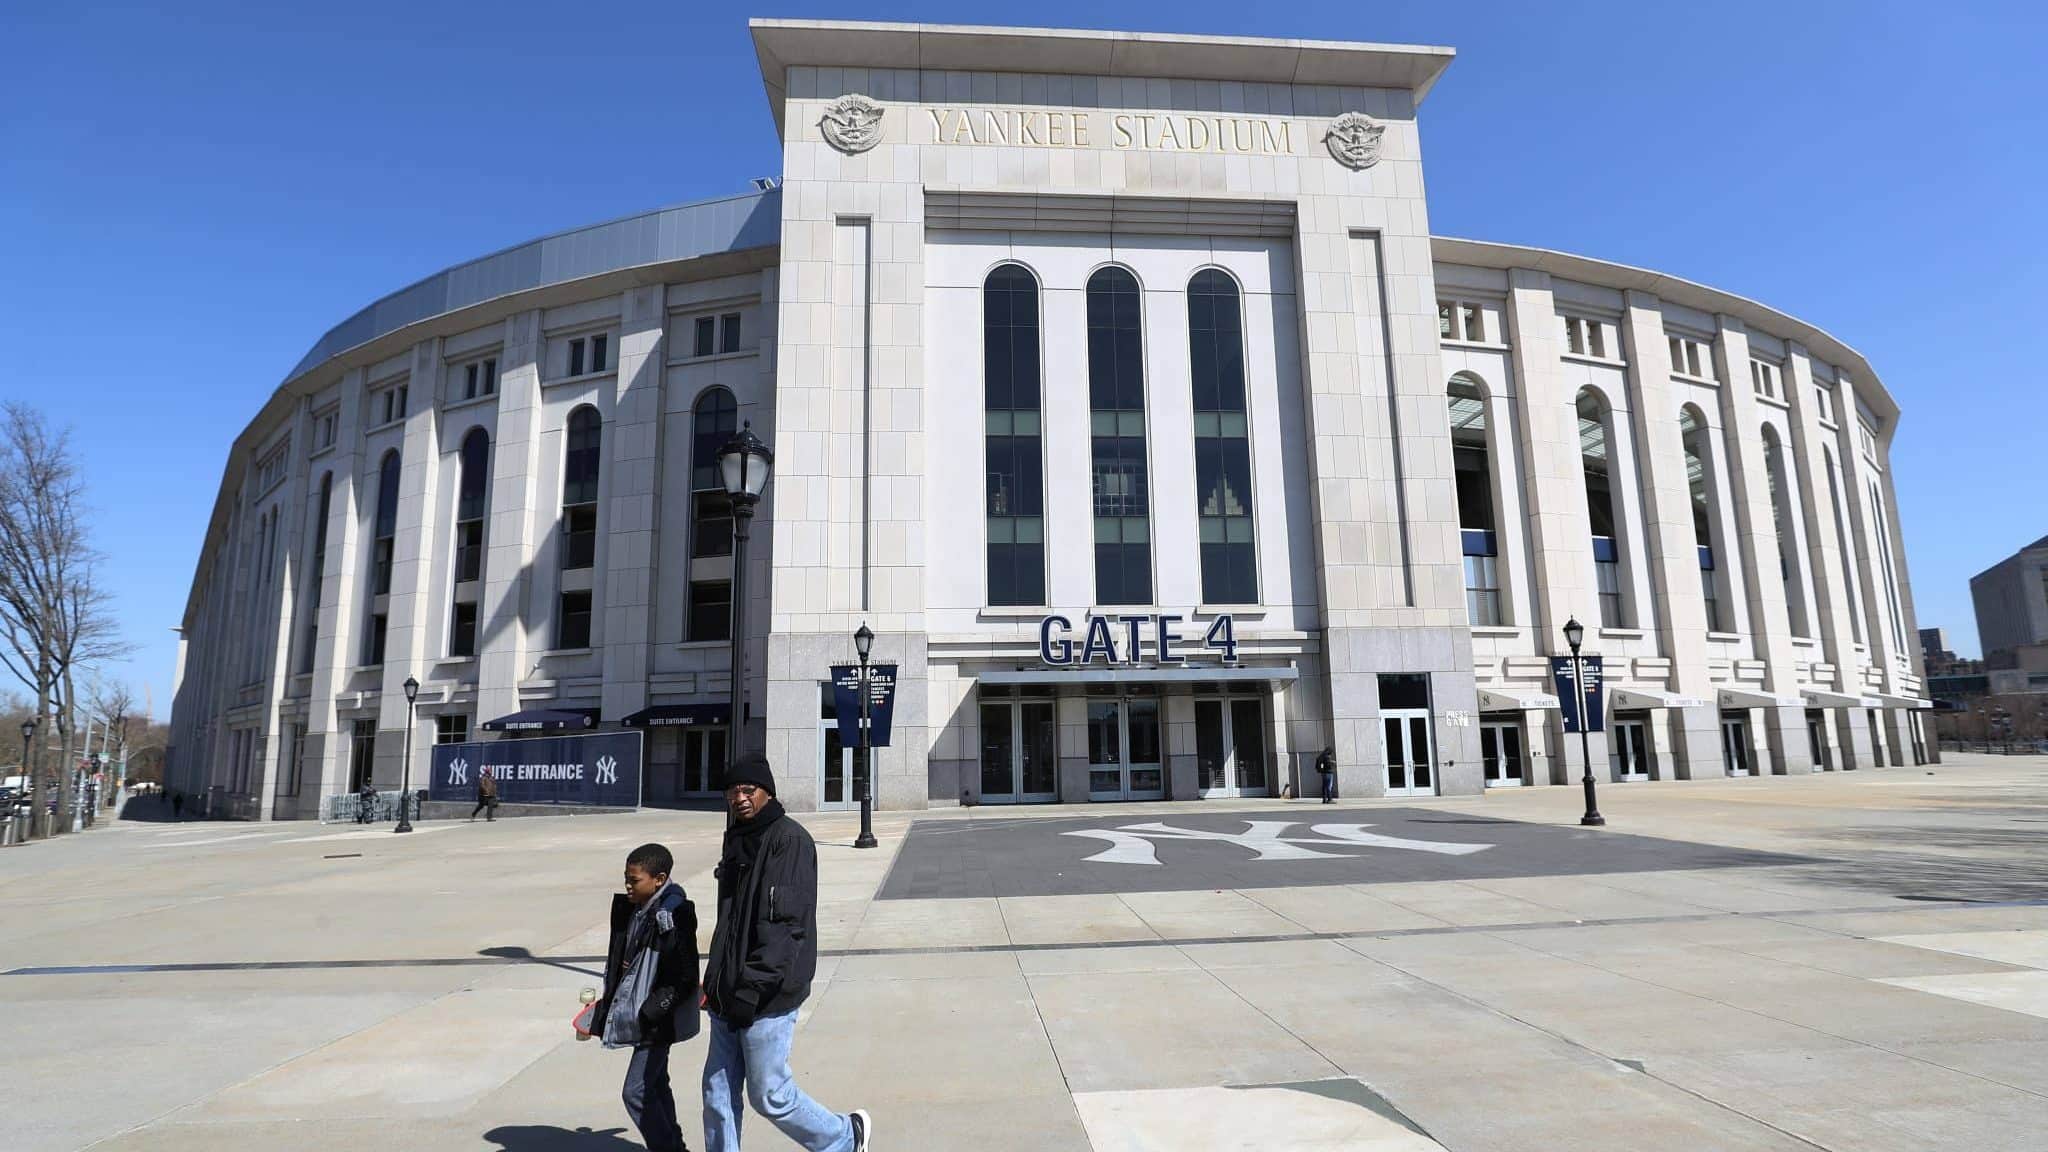 BRONX, NEW YORK - MARCH 26: A father and son walk past a closed Yankee Stadium on the scheduled date for Opening Day March 26, 2020 in the Bronx, New York. Major League Baseball has postponed the start of its season due to the coronavirus (COVID-19) outbreak and MLB commissioner Rob Manfred recently said the league is 